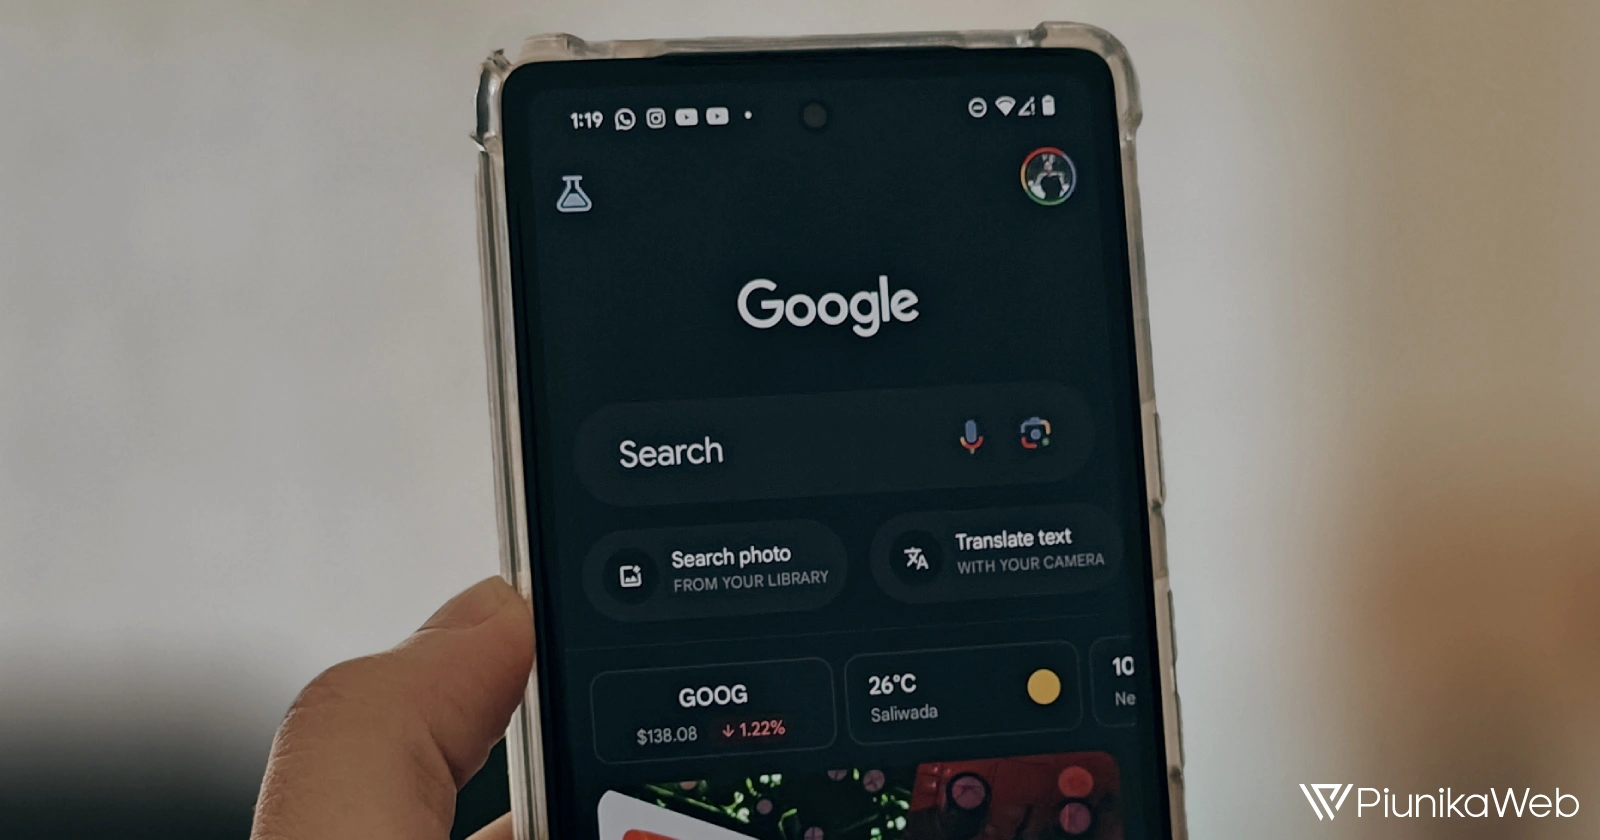 Search and Lens shortcuts in Google app get new look